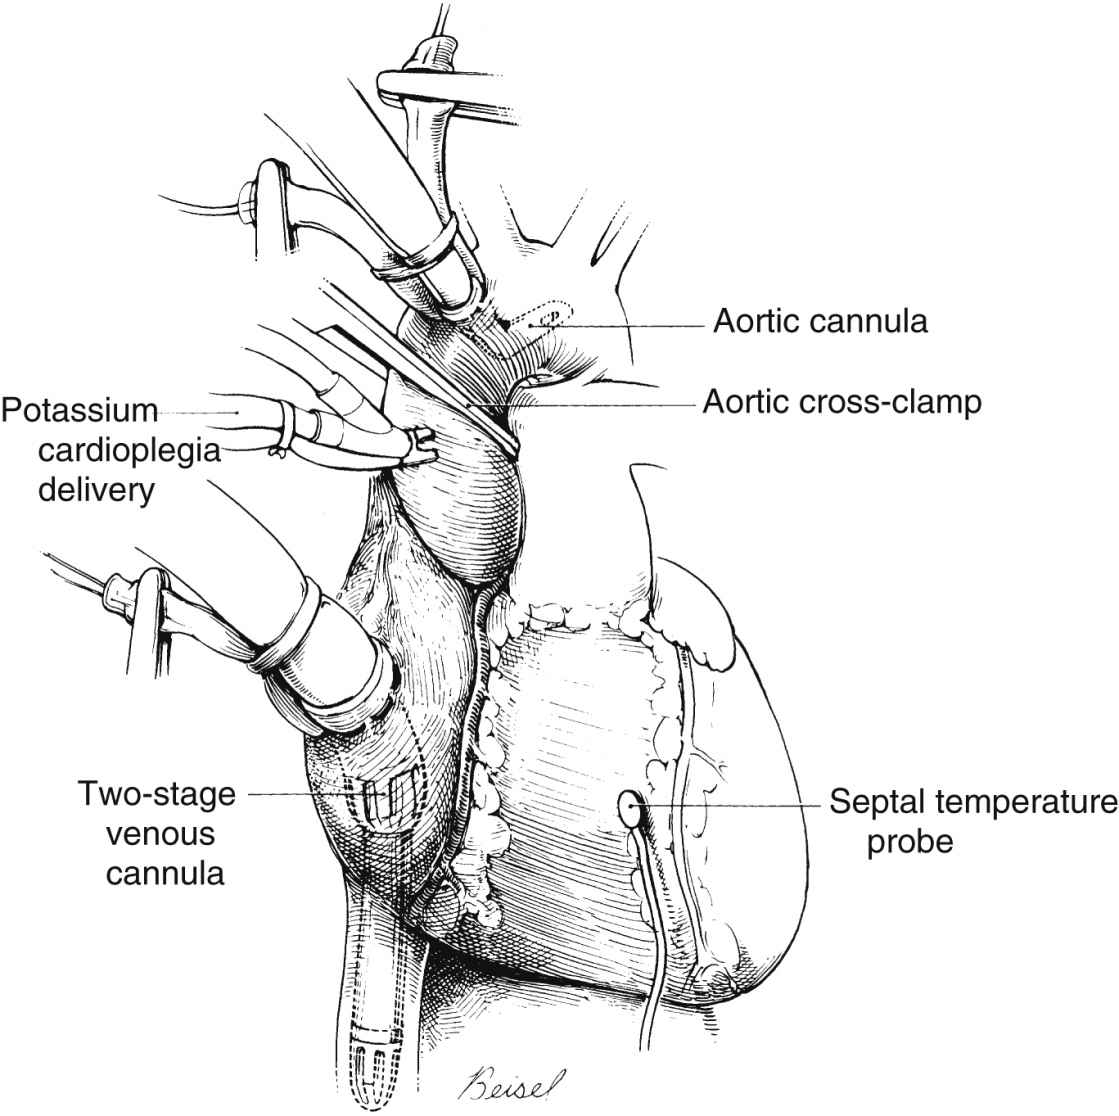 Care of the Cardiac Surgical Patient | Anesthesia Key